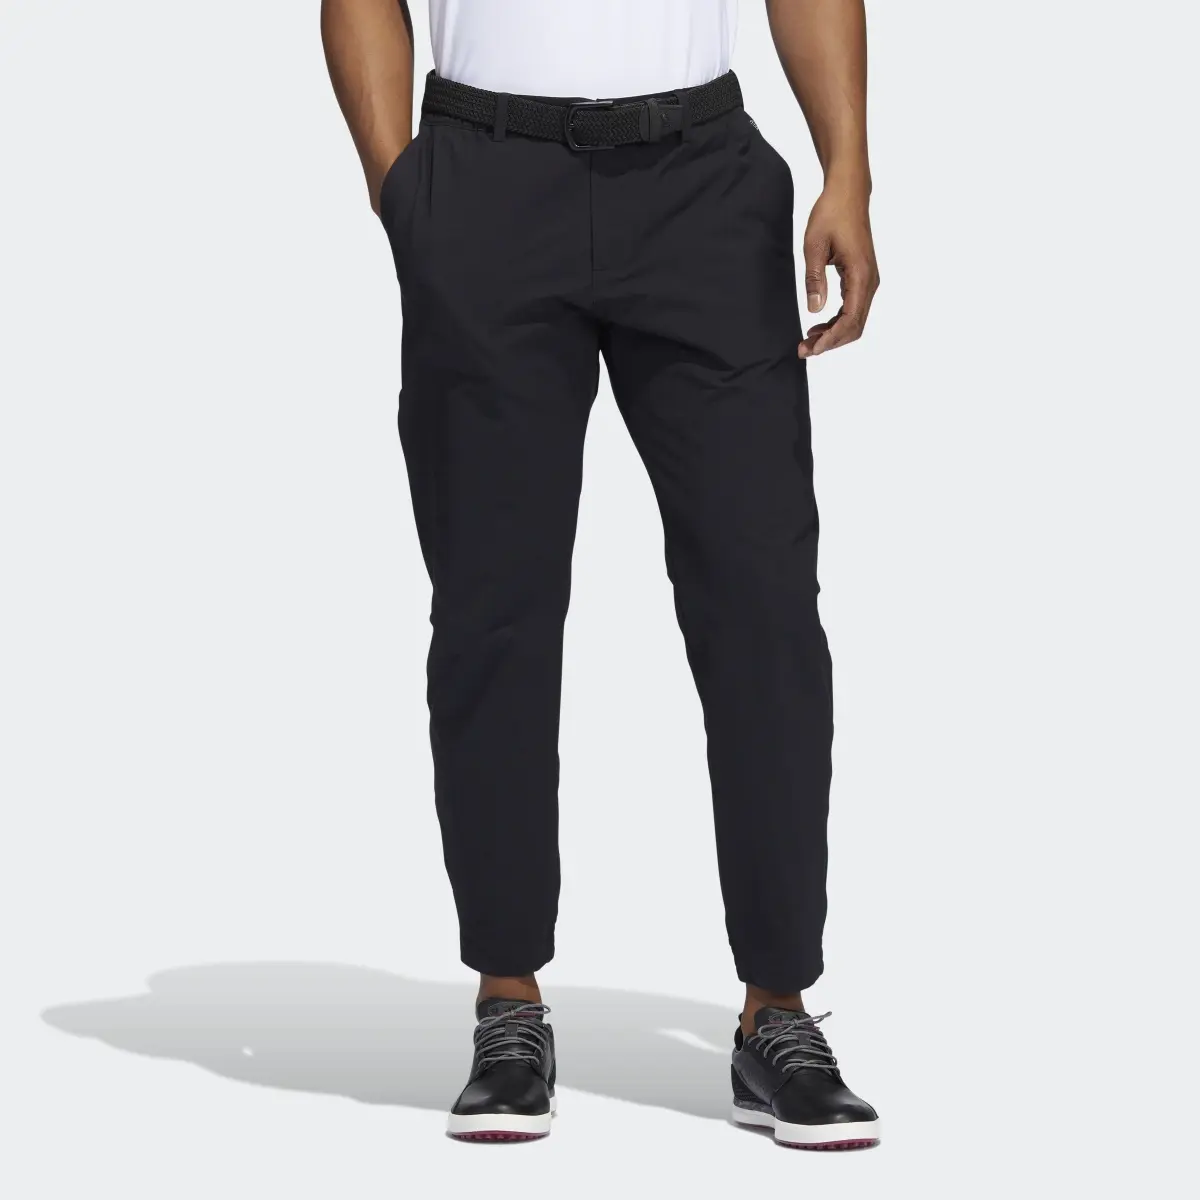 Adidas Go-To Commuter Golf Pants. 1